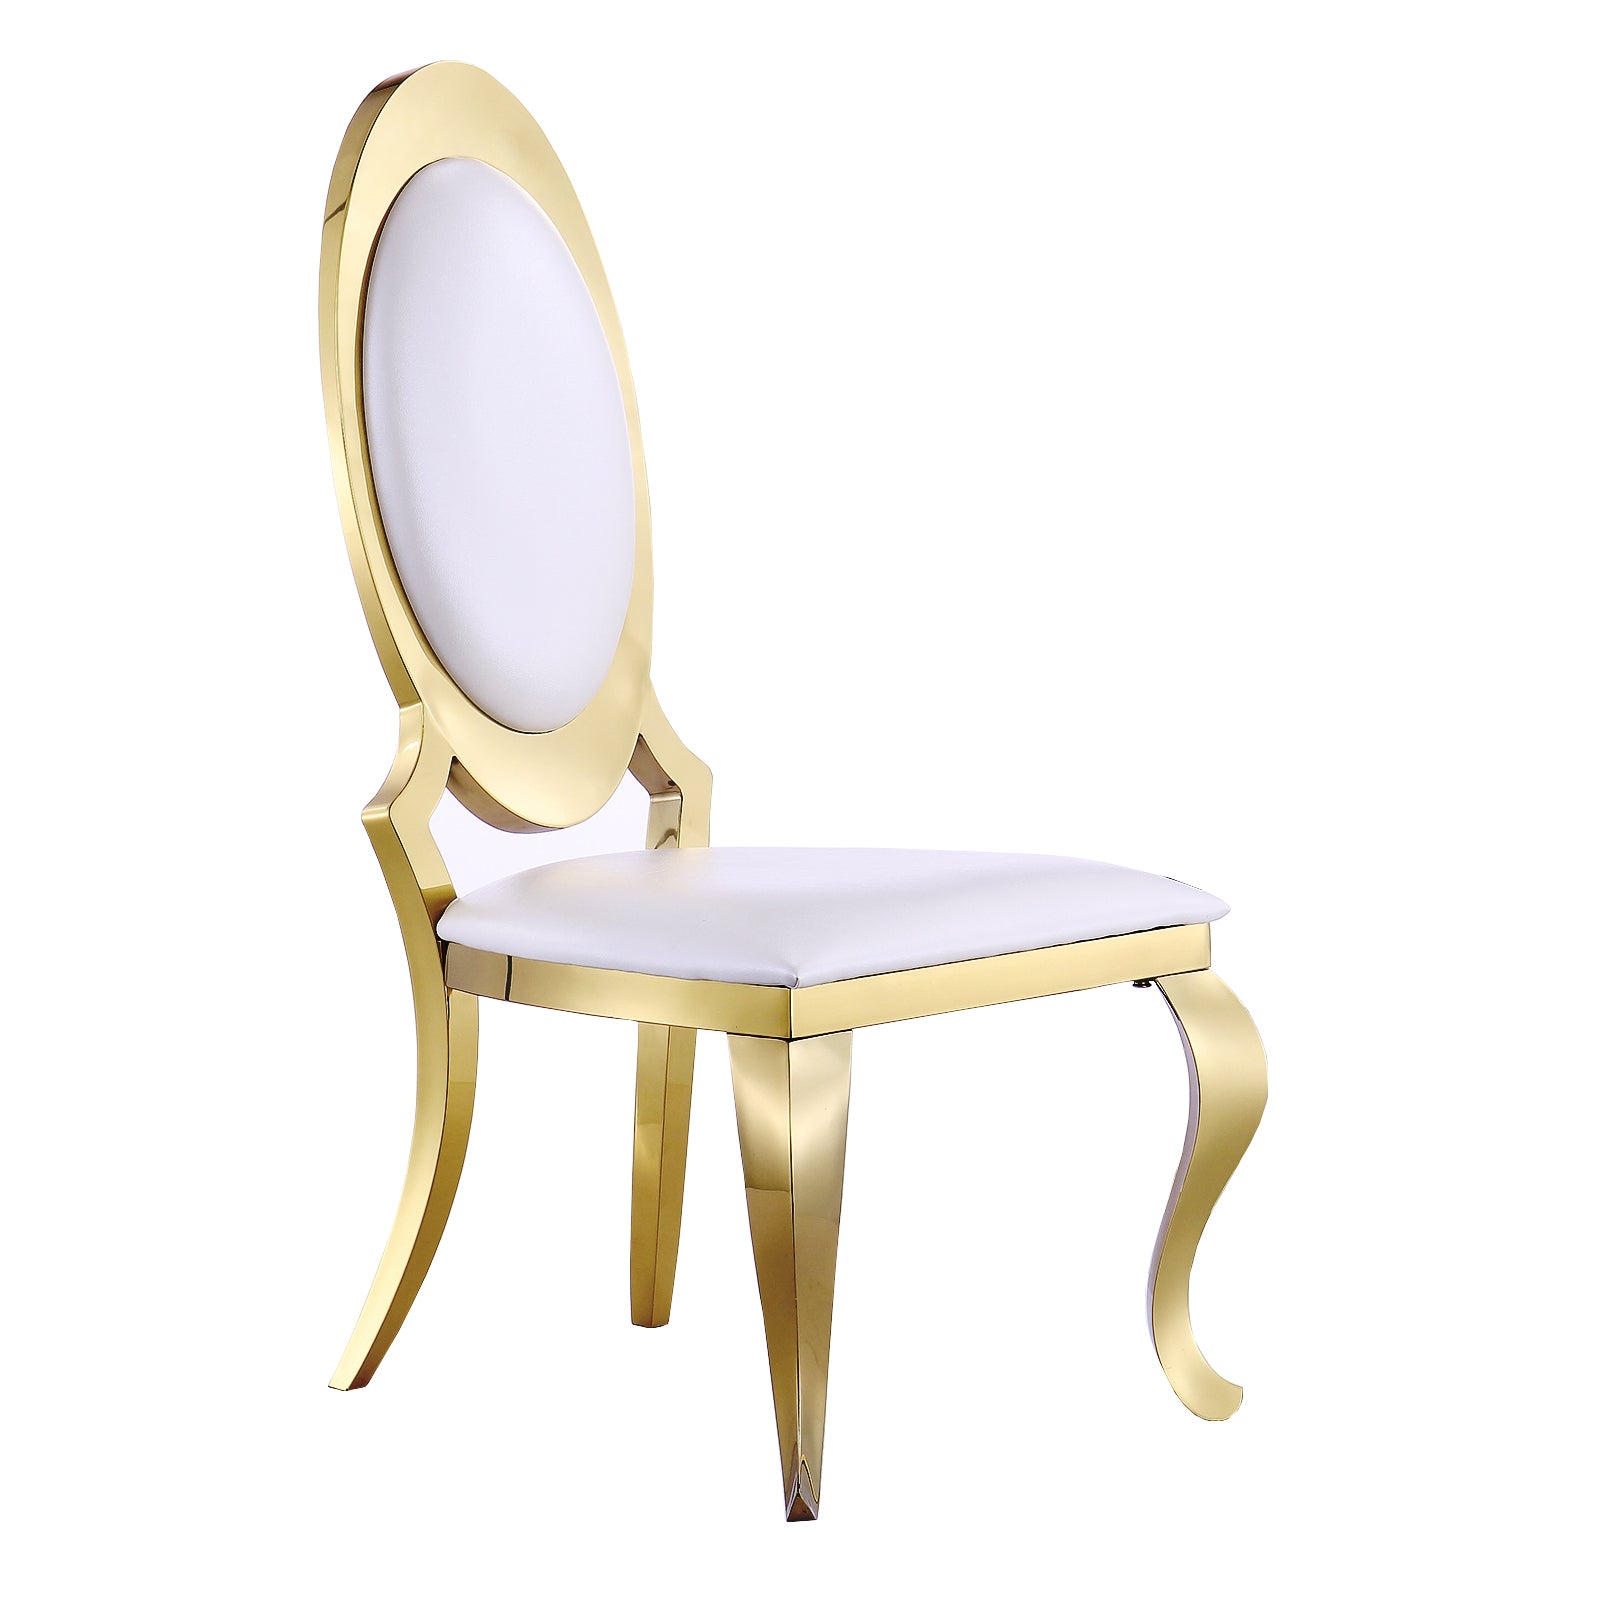 703 Set | AUZ White and Gold Dining room Sets for 6